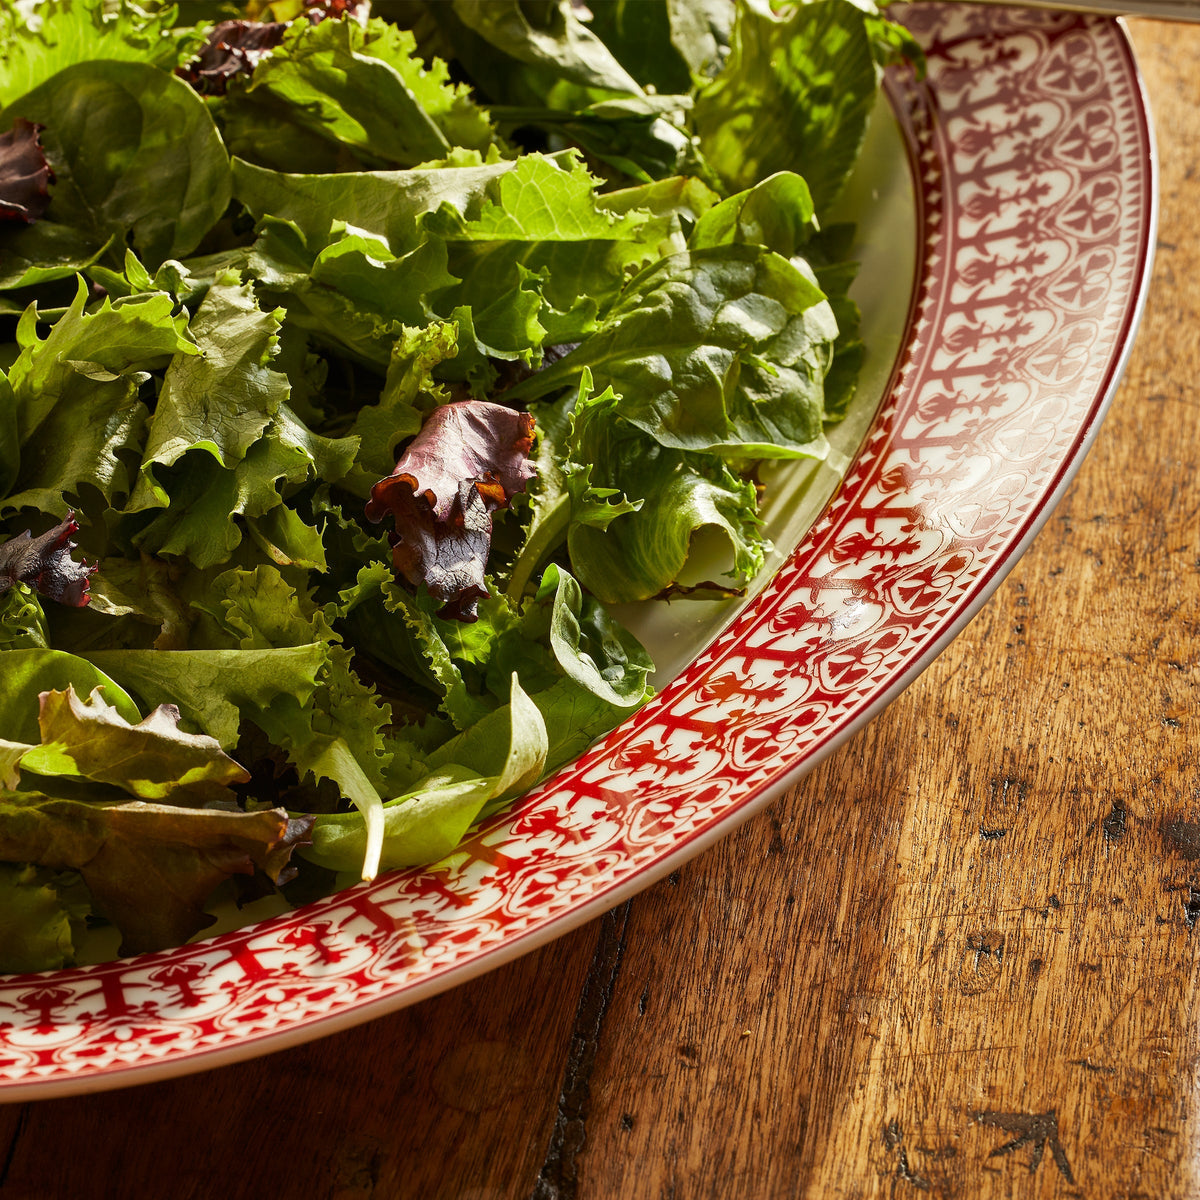 Closeup of Caskata&#39;s Casablanca Crimson Rimmed Platter shows the detail of the rich red pattern against bright salad greens.